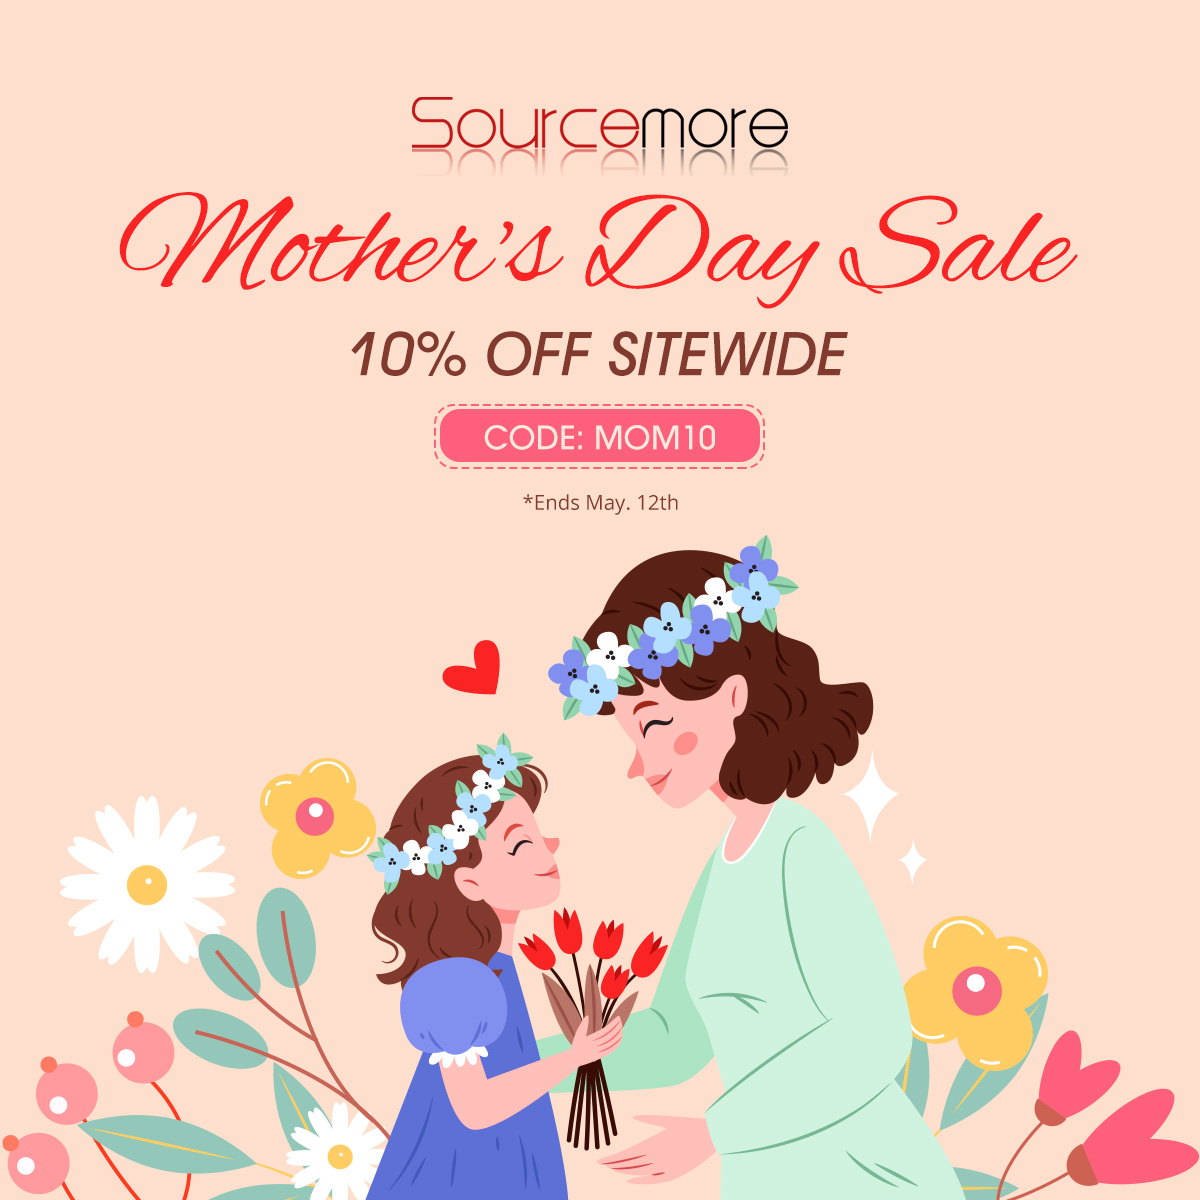 Sourcemore 2024 Mother's Day Sale💥💥 Sale page👉👉sourcemore.com Sale Time: ⏳May 10th - May 12th⏳ 10% OFF SITEWIDE Coupon: MOM10❤❤ Bronze Level Exclusive 6% OFF Coupon: MOM5❤❤(Must log in) Warning: For Adult use only.